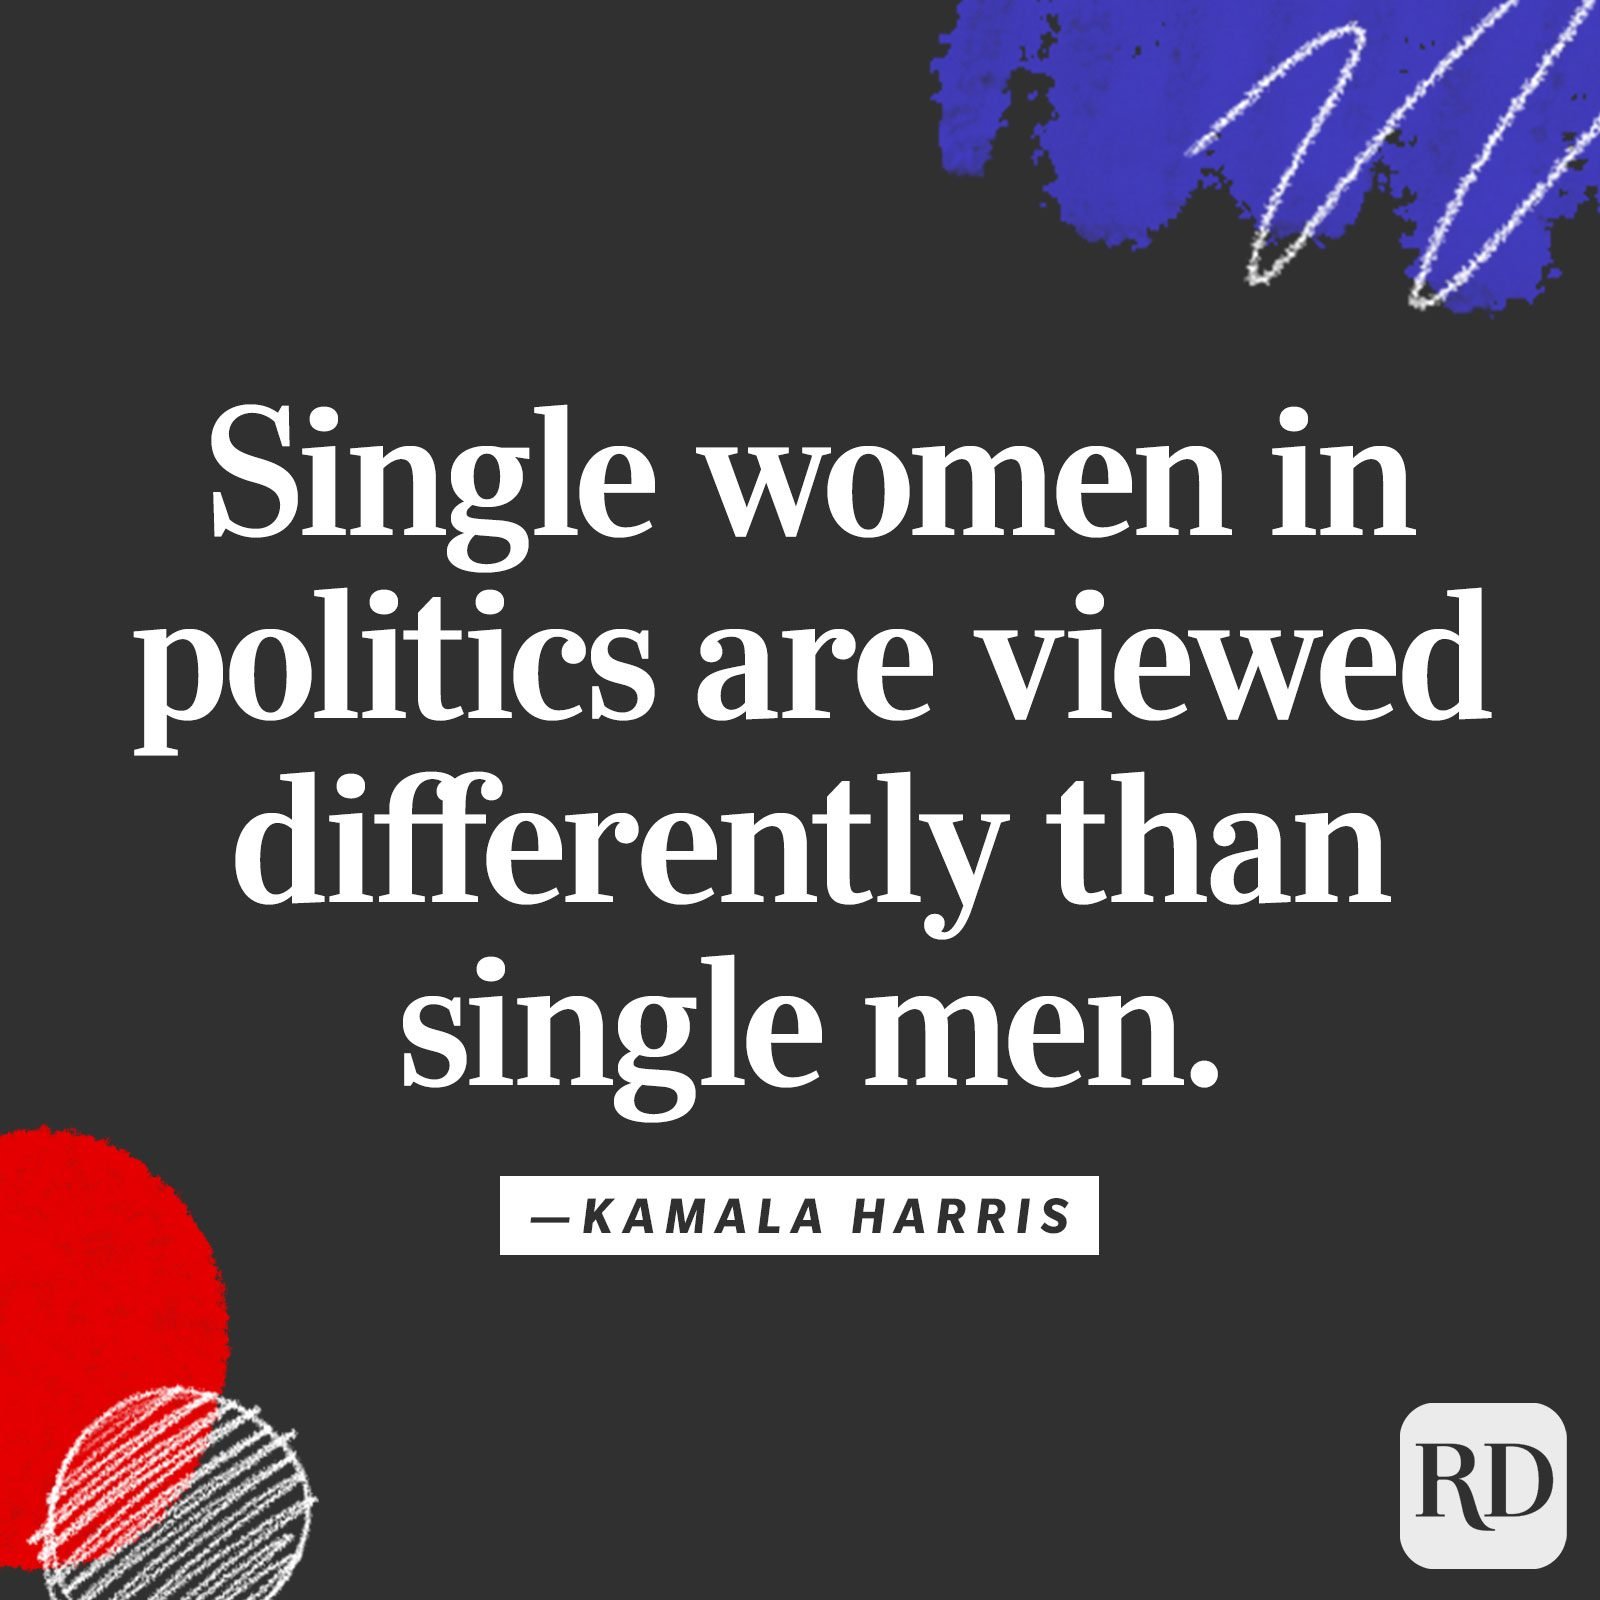 "Single women in politics are viewed differently than single men."